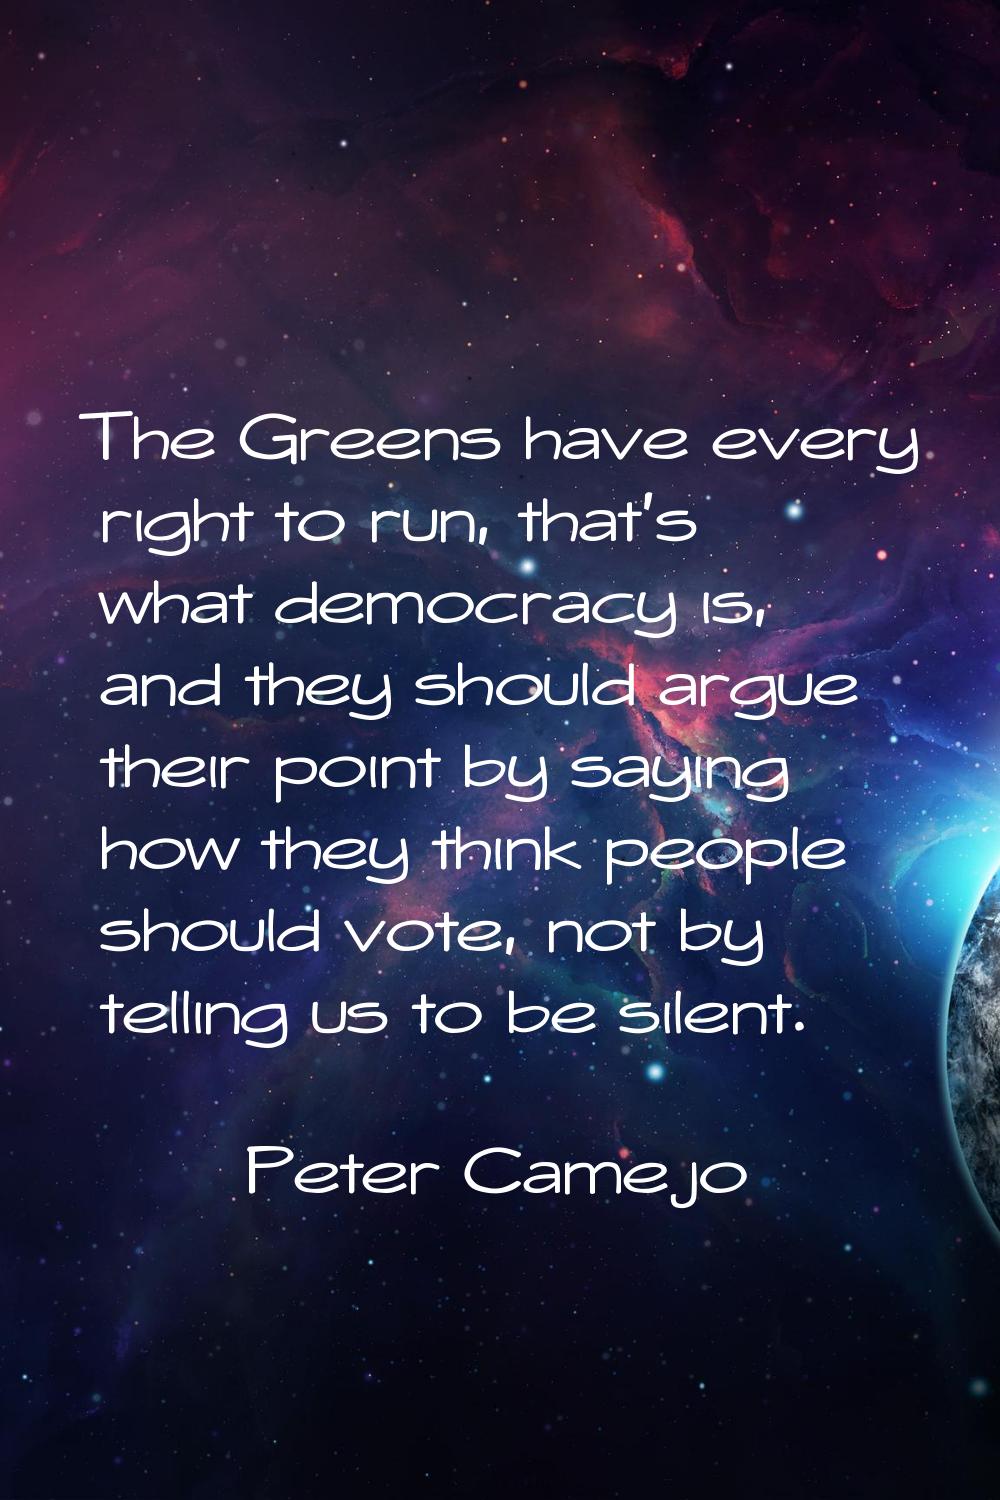 The Greens have every right to run, that's what democracy is, and they should argue their point by 